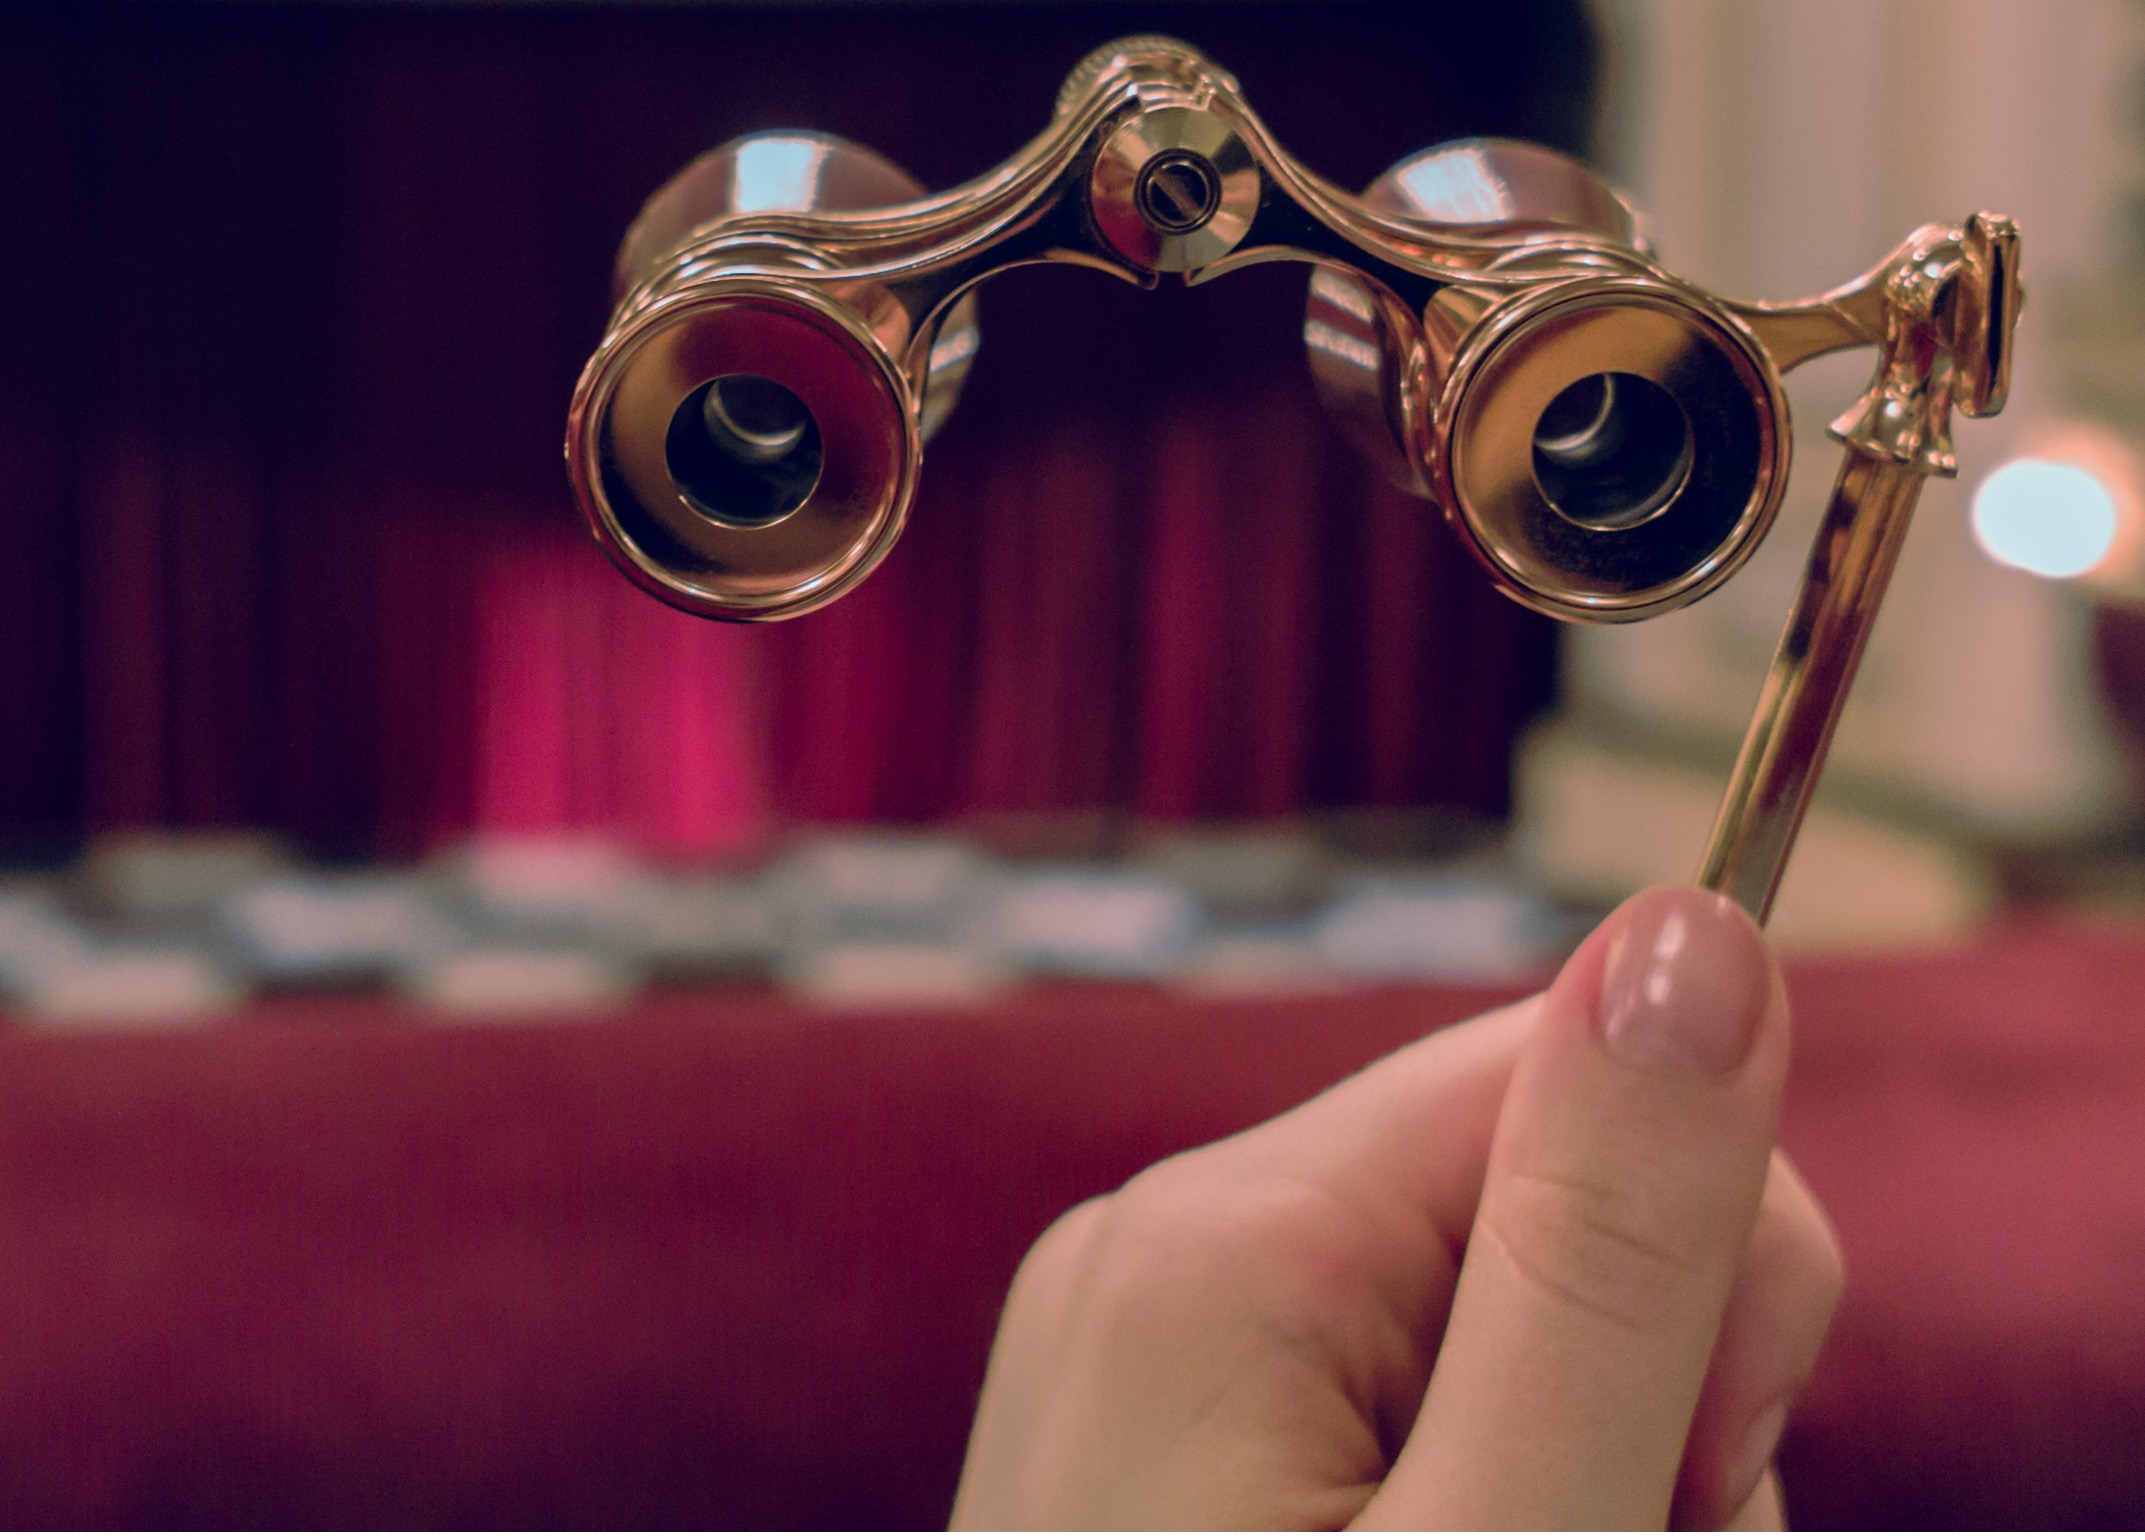 A picture of a person's left hand holding a pair of opera glasses in focus. Out of focus in the background is the stage and front rows of an opera house.